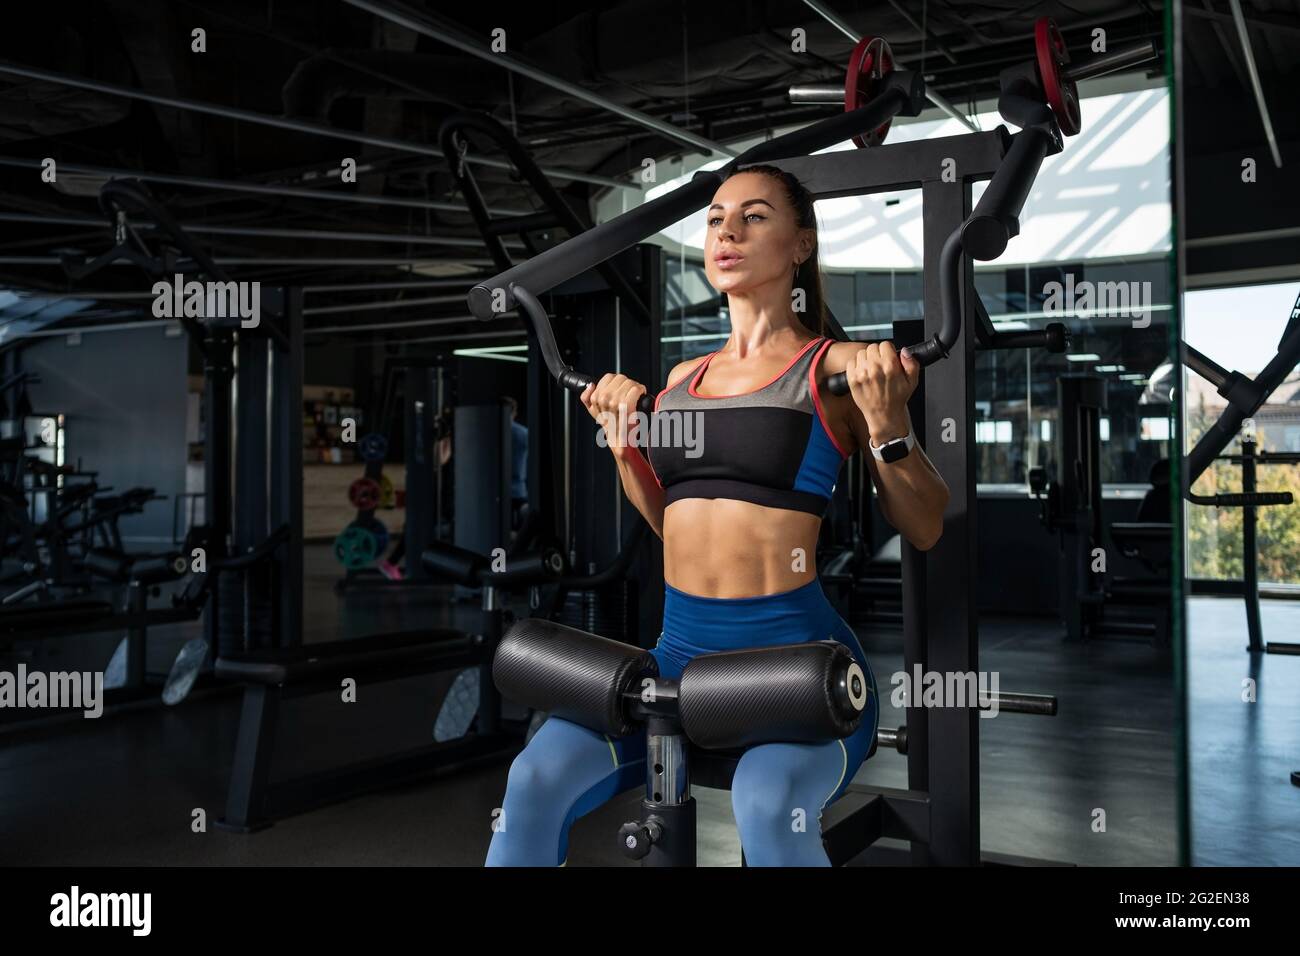 Girl doing exercises for back muscles on strength machines at gym Stock Photo